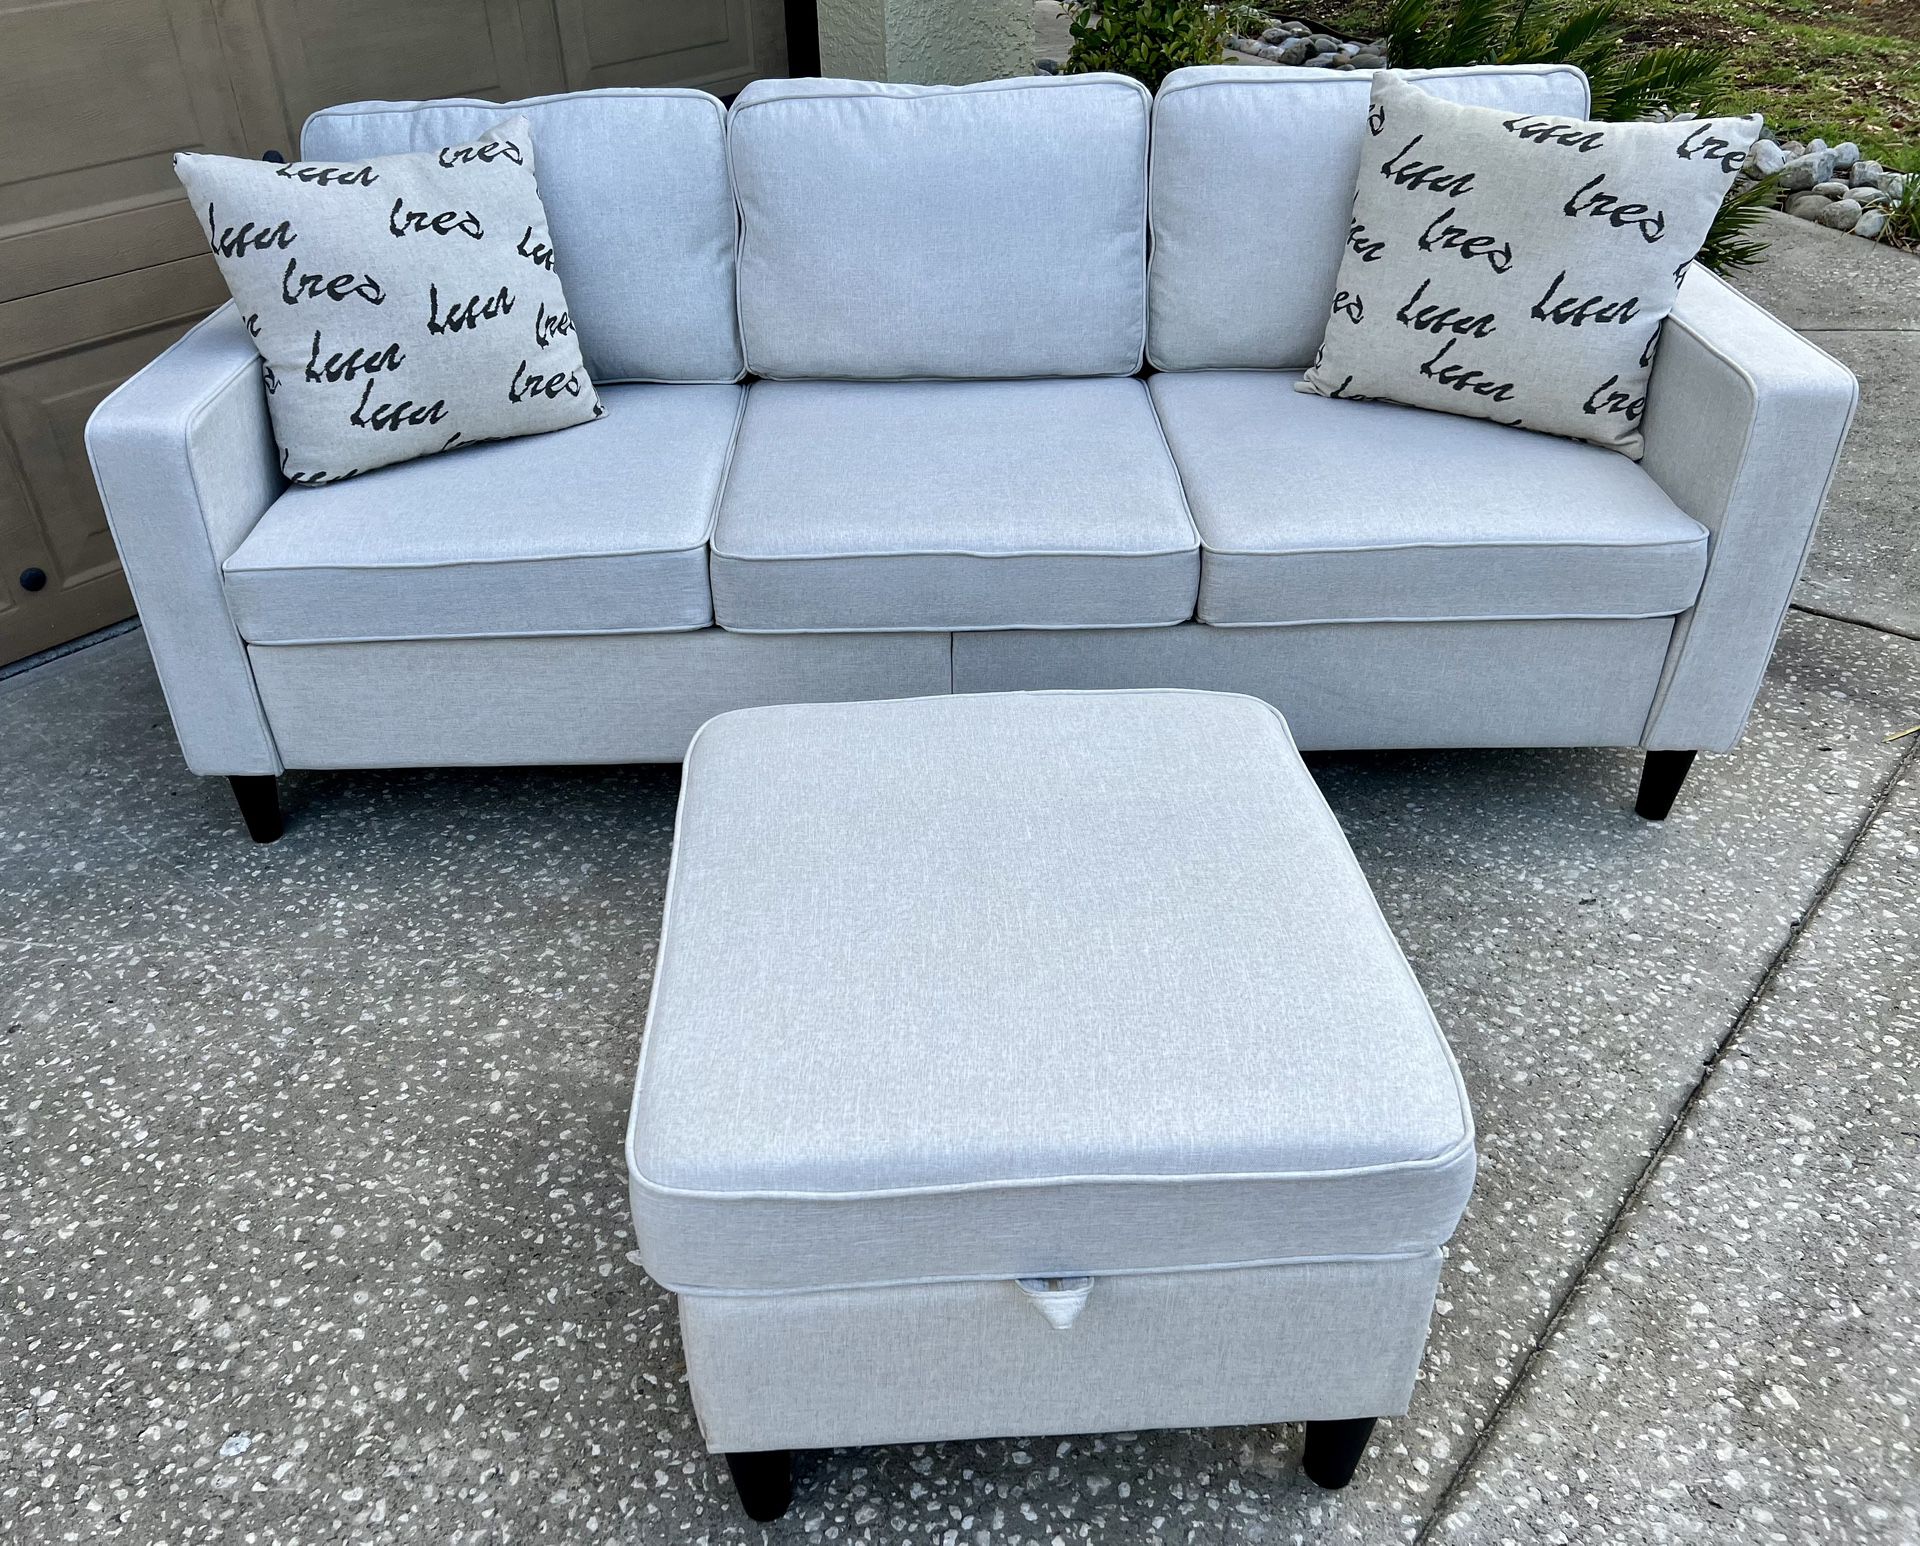 Couch & Ottoman Set